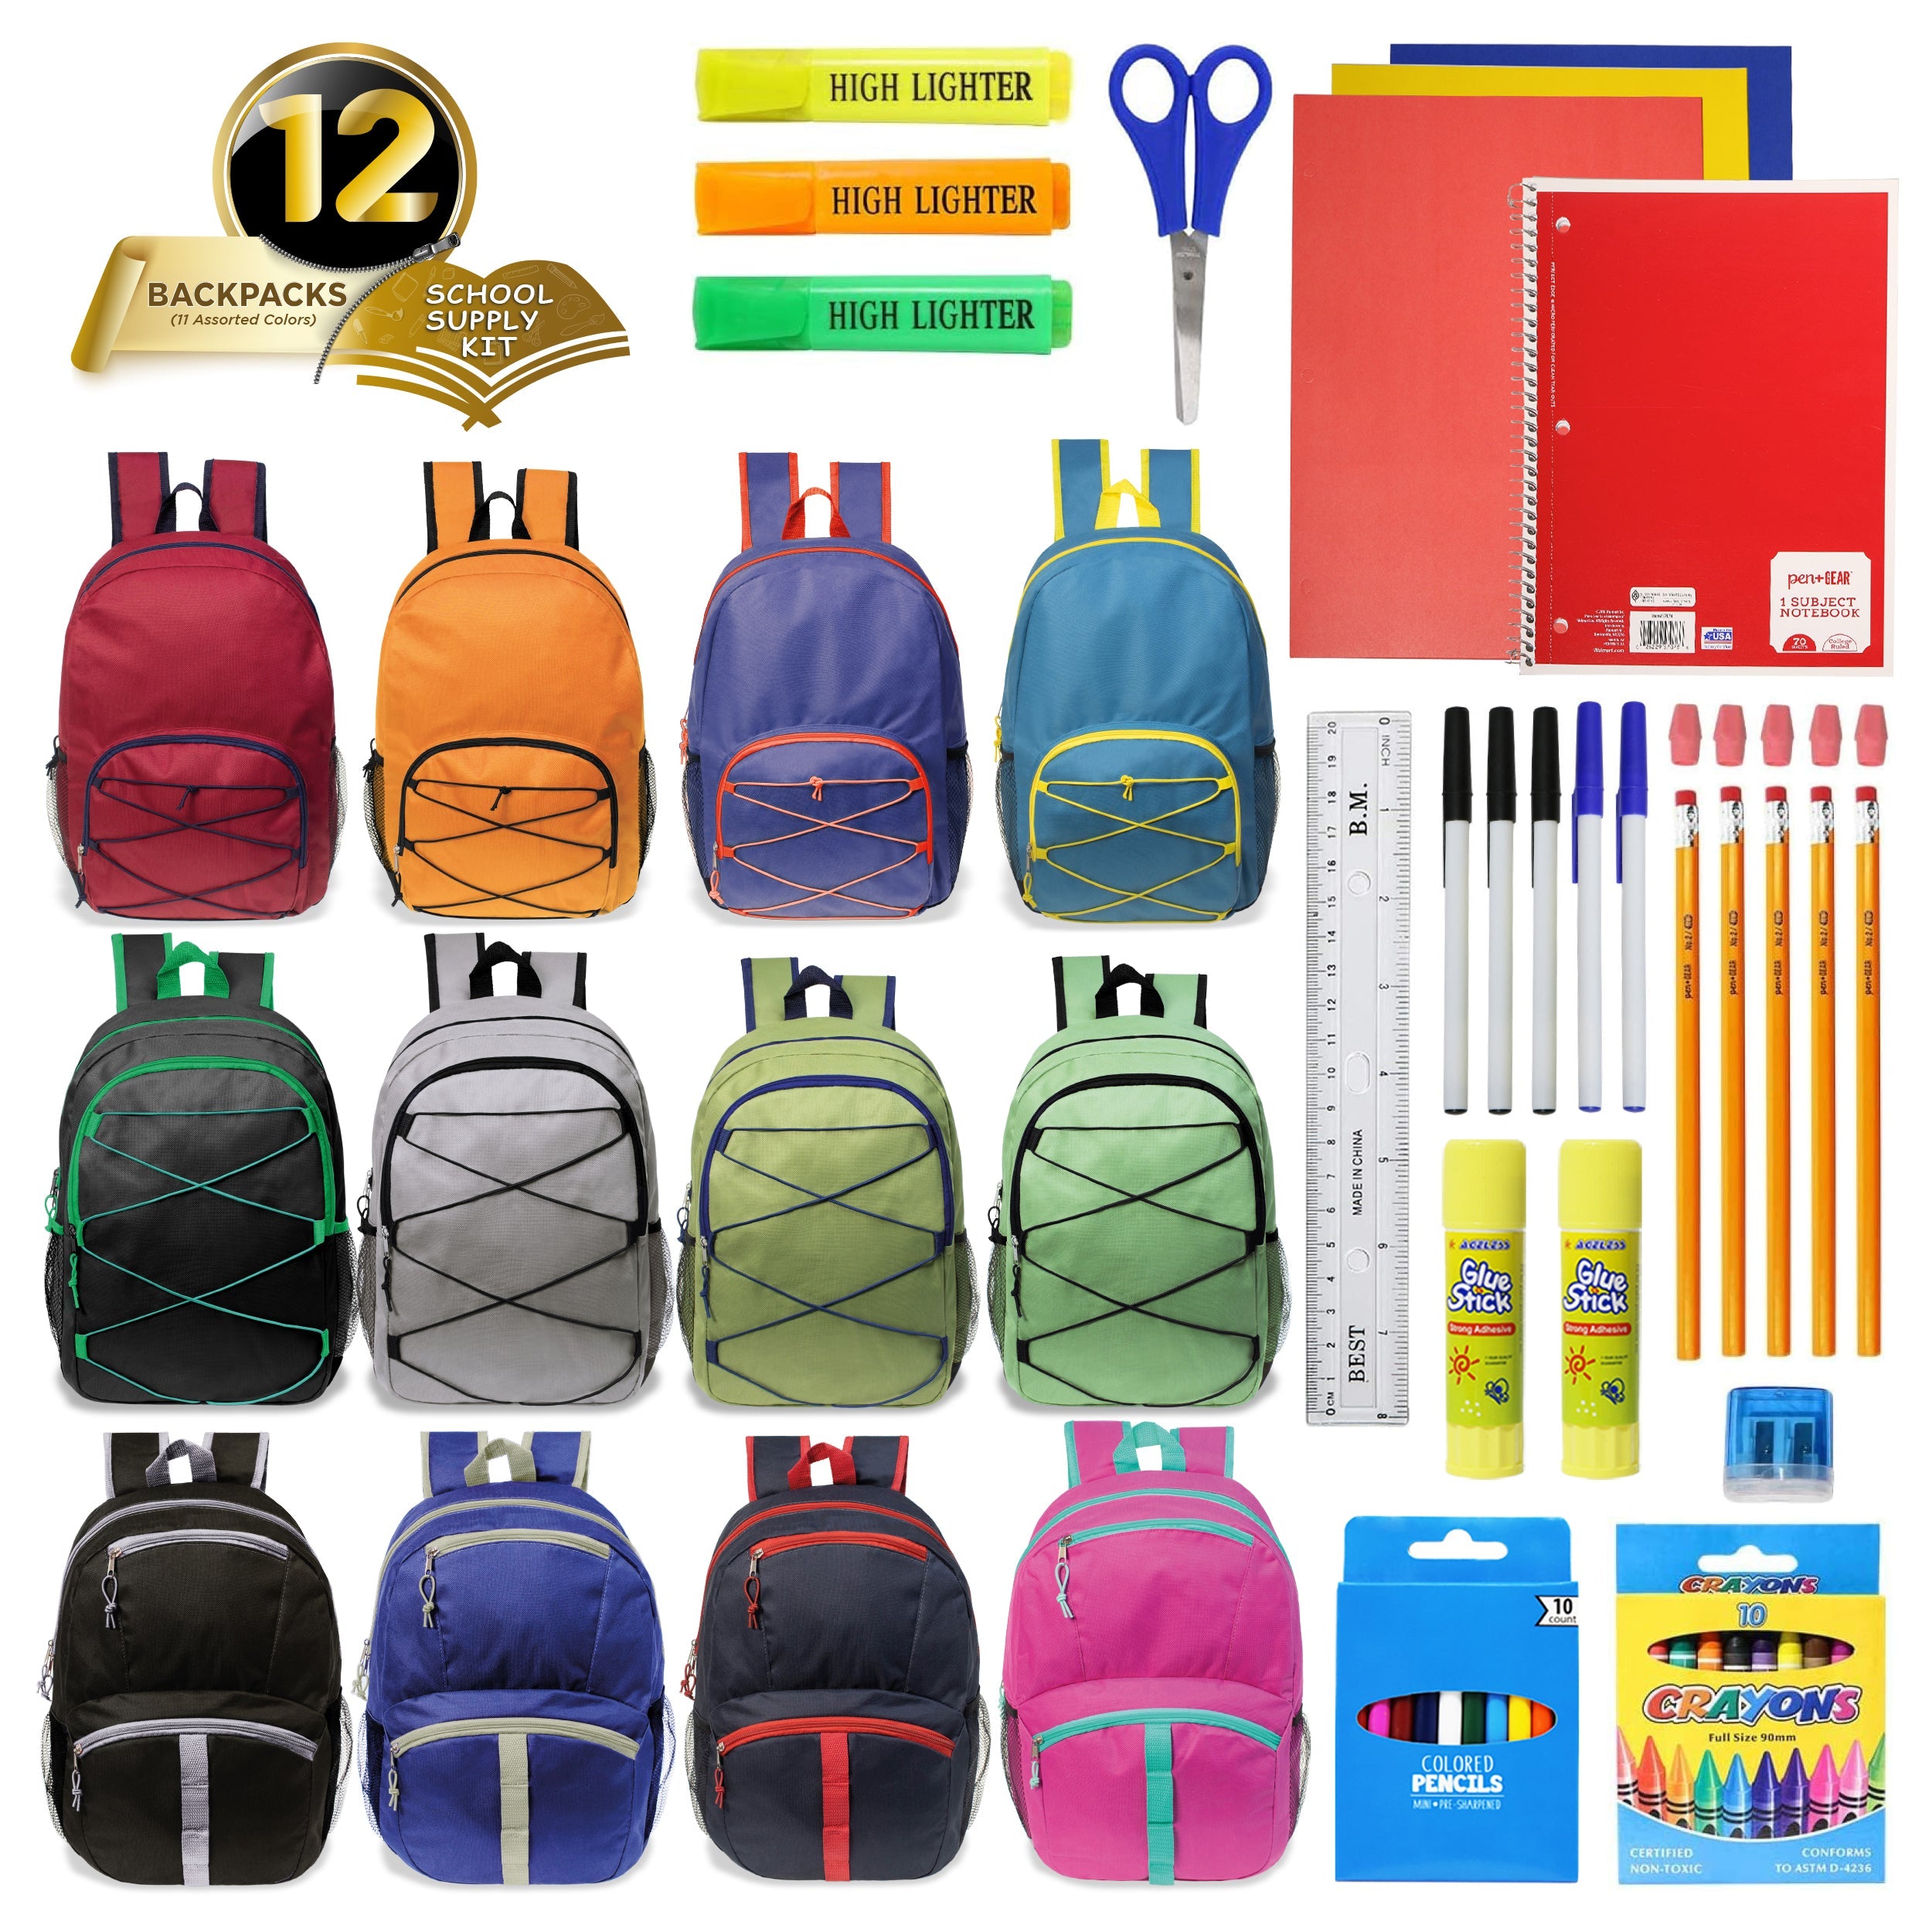 12 Wholesale Backpacks in Assorted Colors with 12 Bulk School Supply Kits of Your Choice